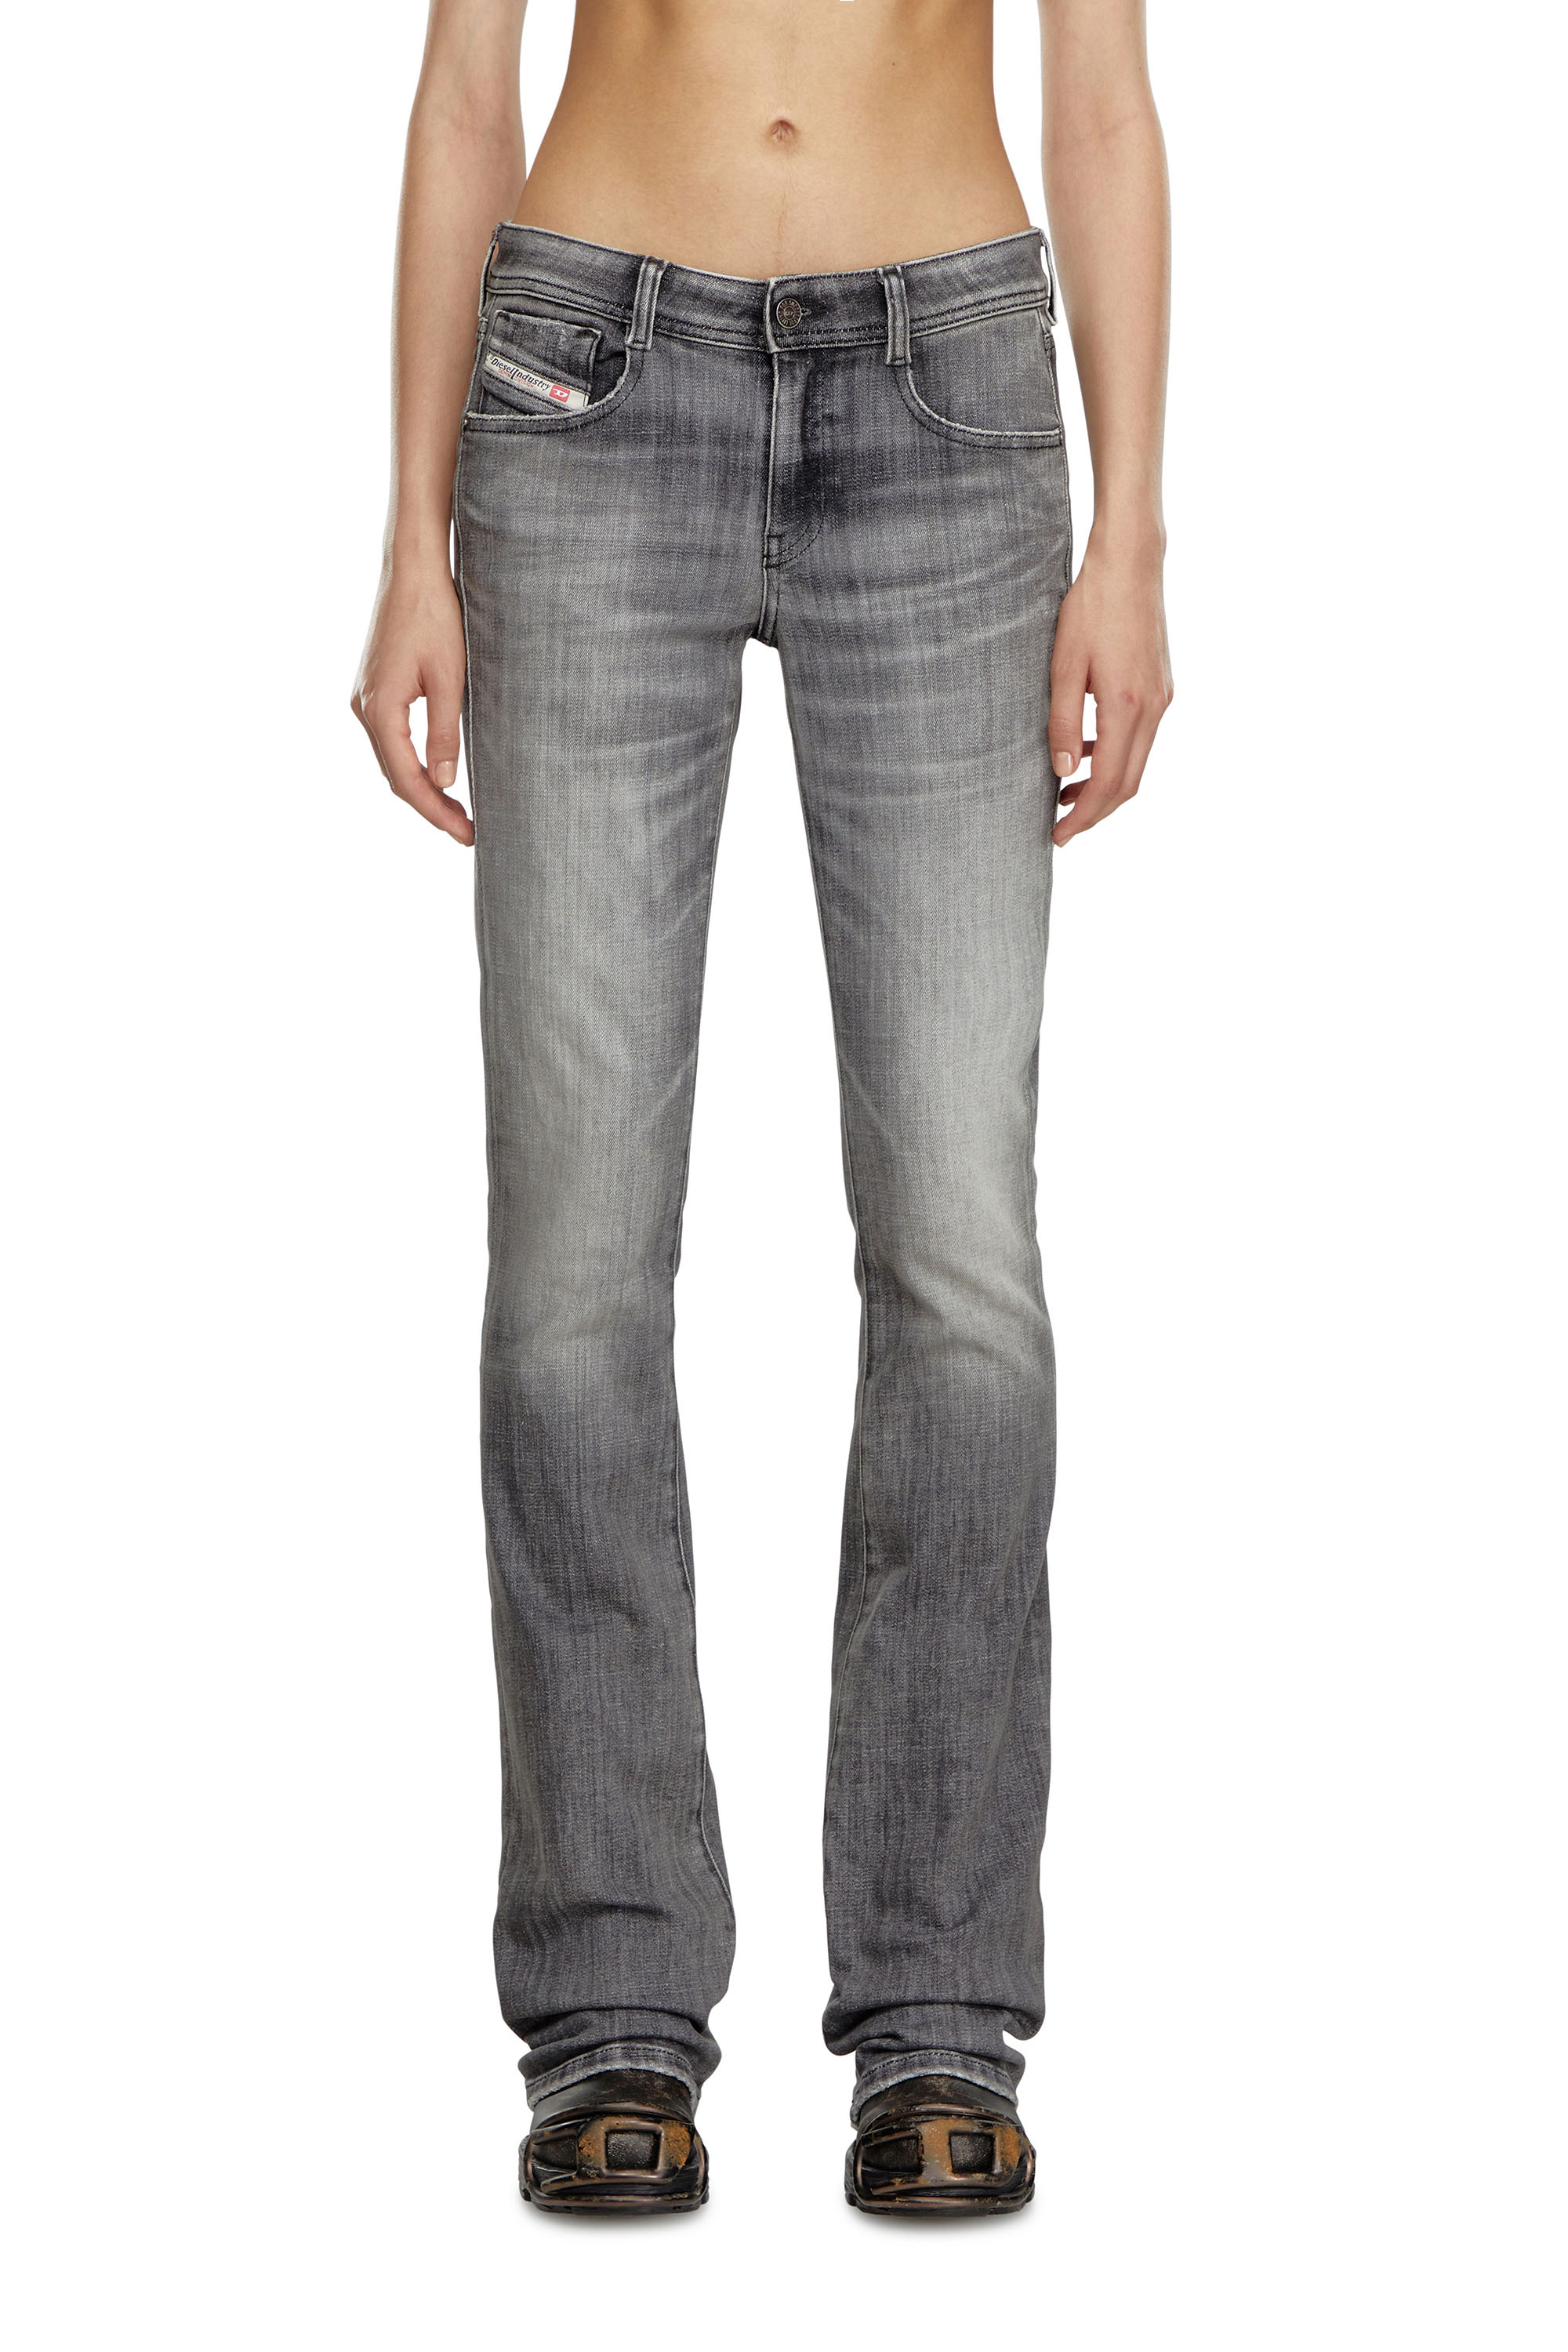 Diesel - Bootcut and Flare Jeans 1969 D-Ebbey 09J29, Mujer Bootcut y Flare Jeans - 1969 D-Ebbey in Gris - Image 1